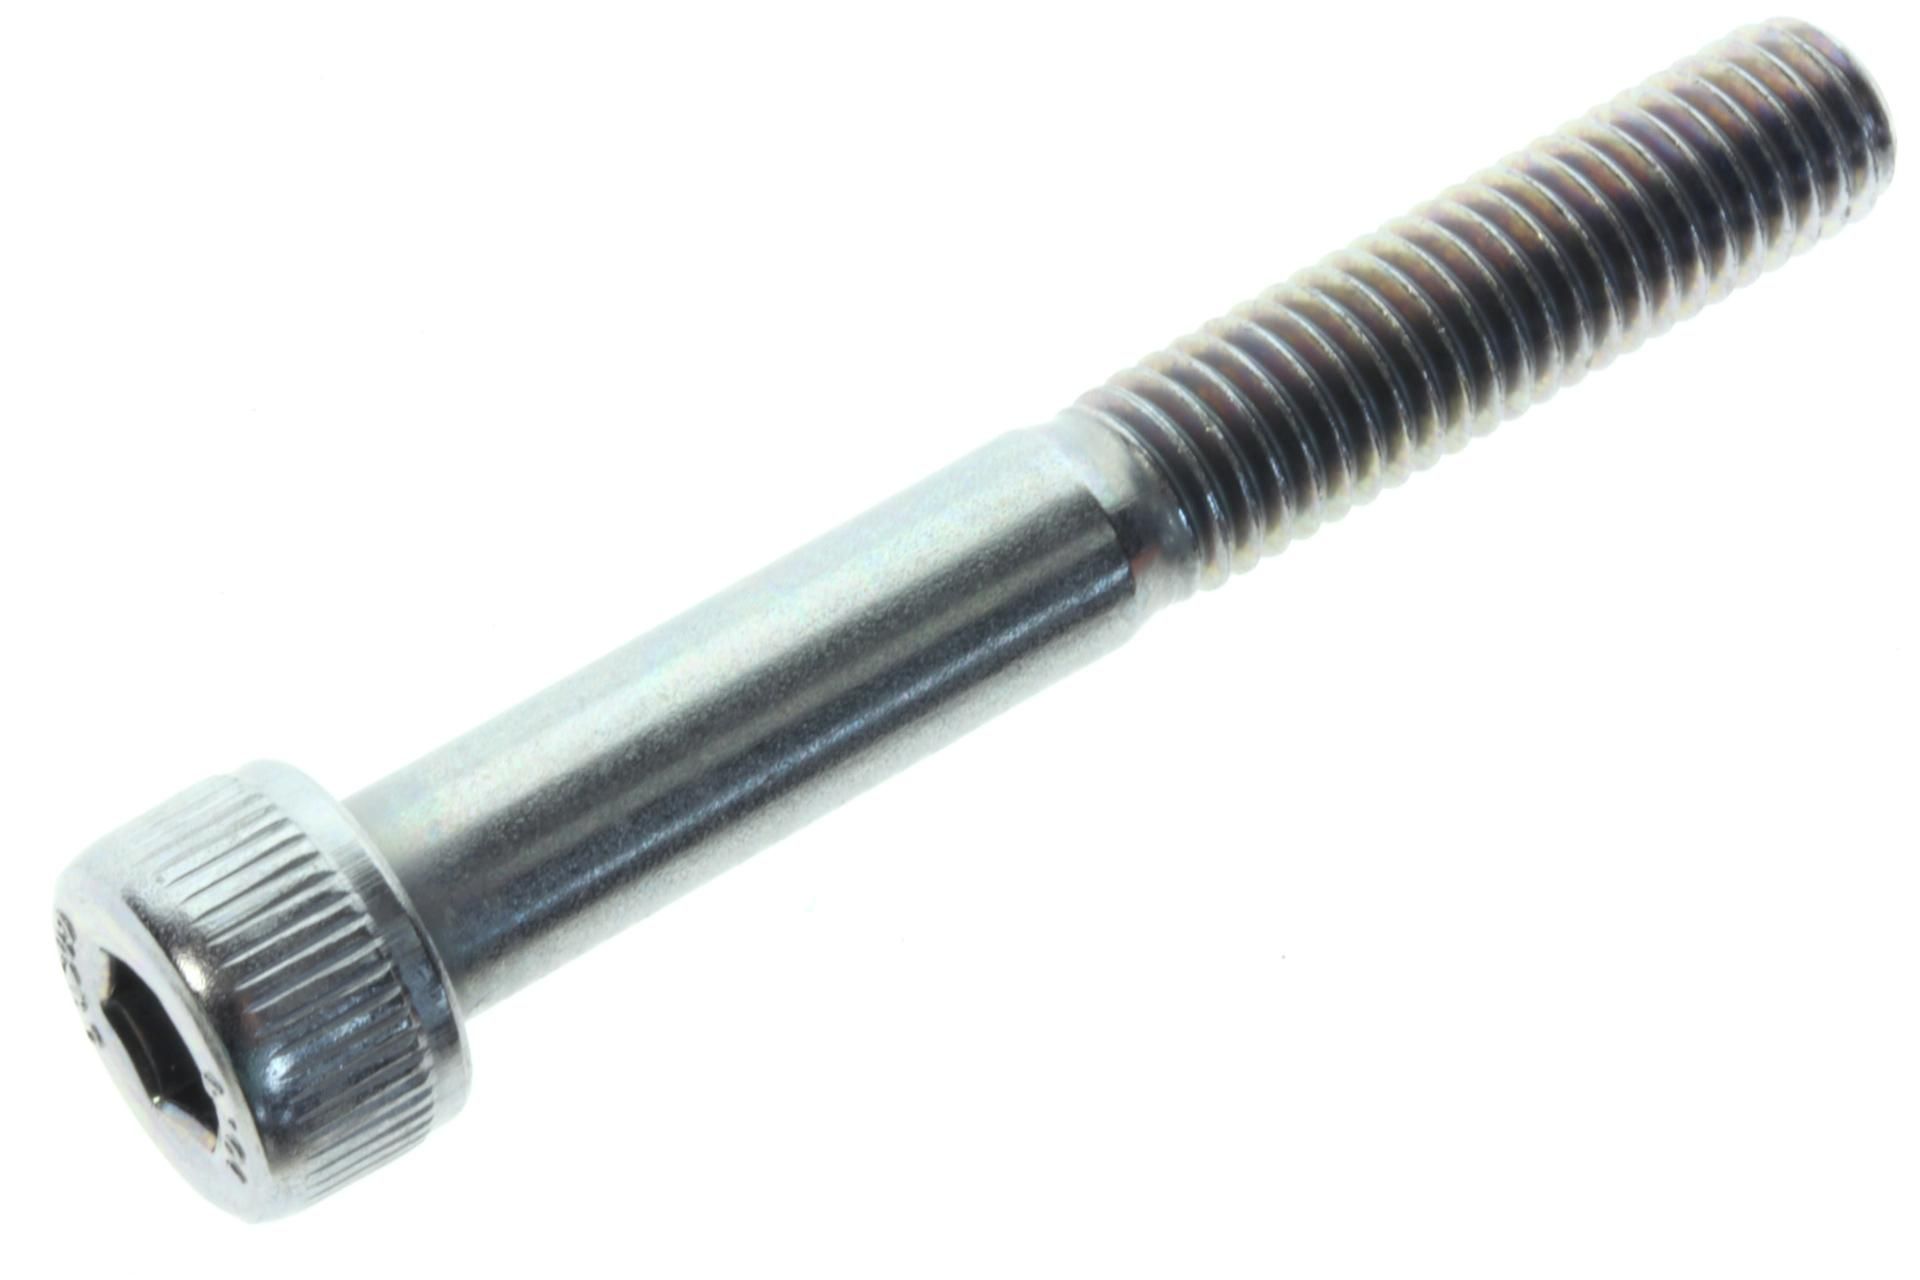 91311-08060-00 Superseded by 91314-08060-00 - BOLT, SOCKET